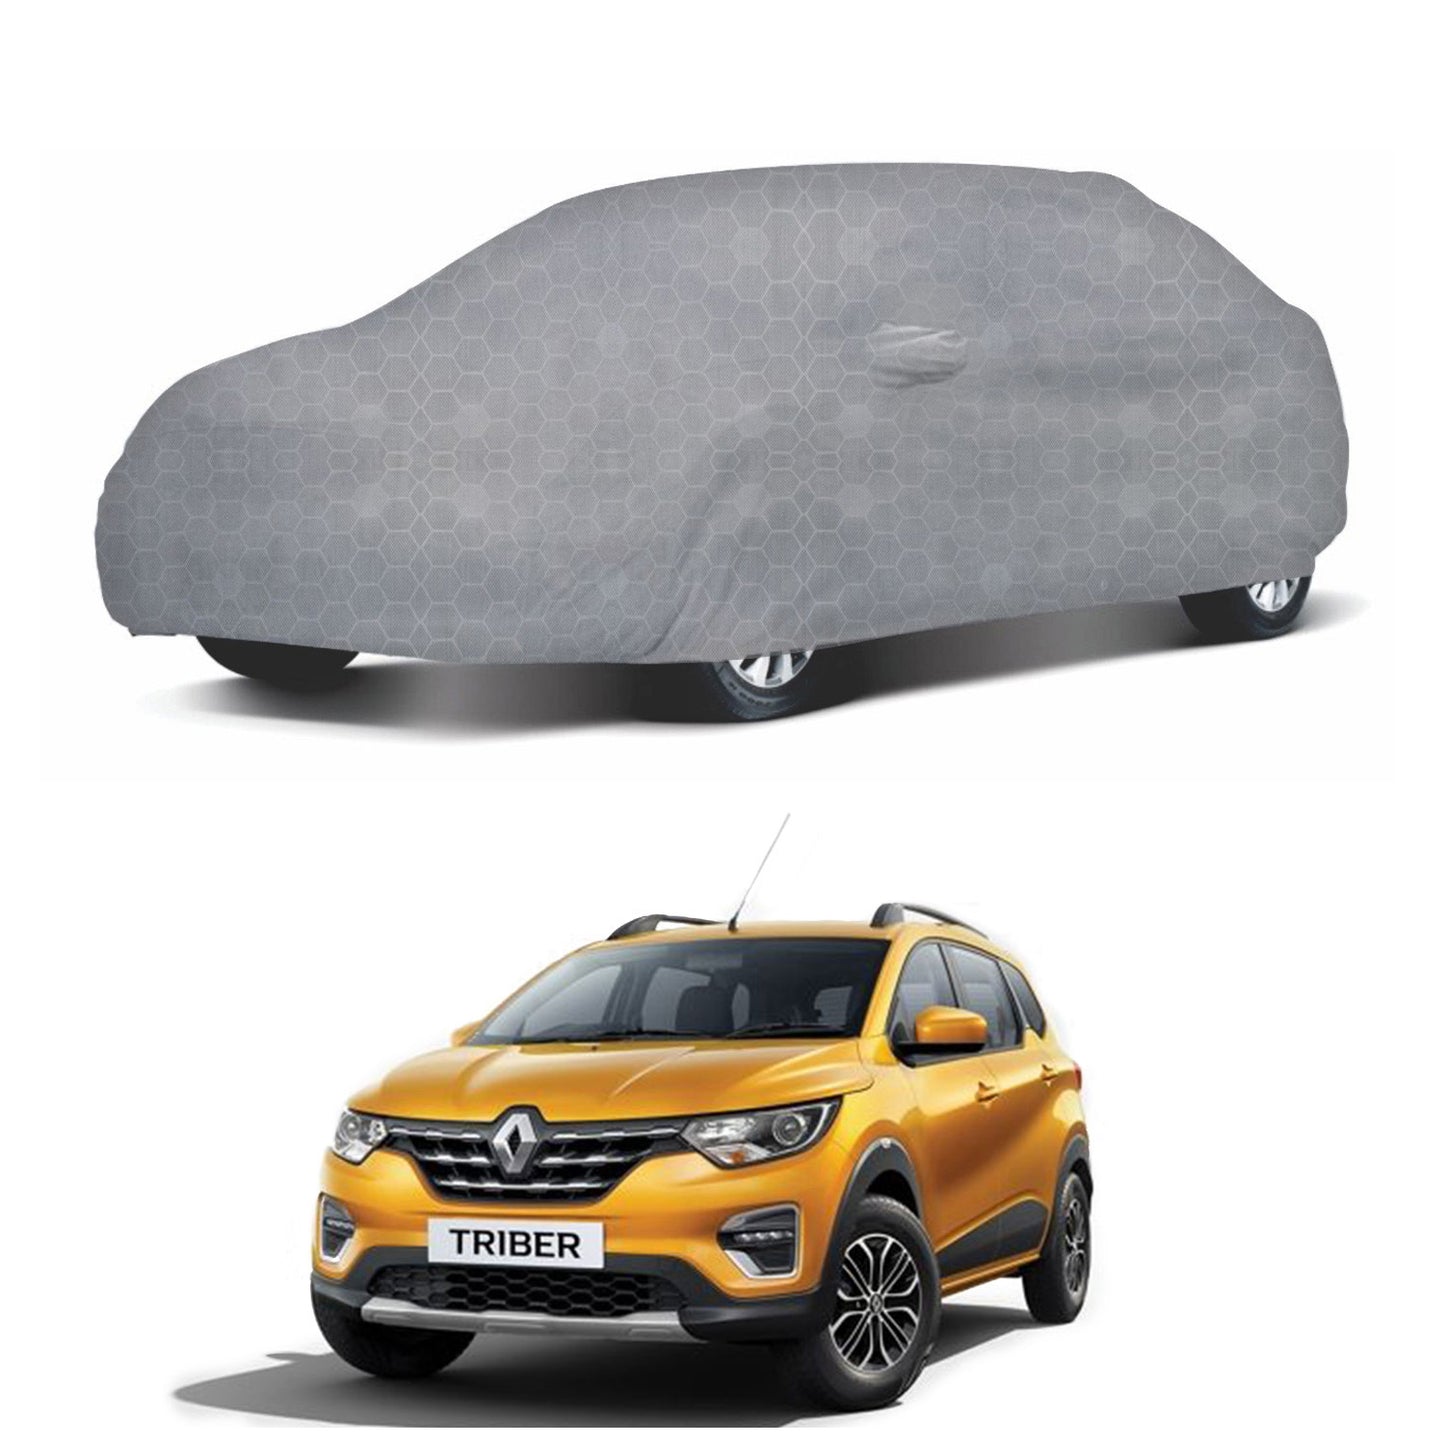 Oshotto 100% Dust Proof, Water Resistant Grey Car Body Cover with Mirror Pocket For Renault Triber